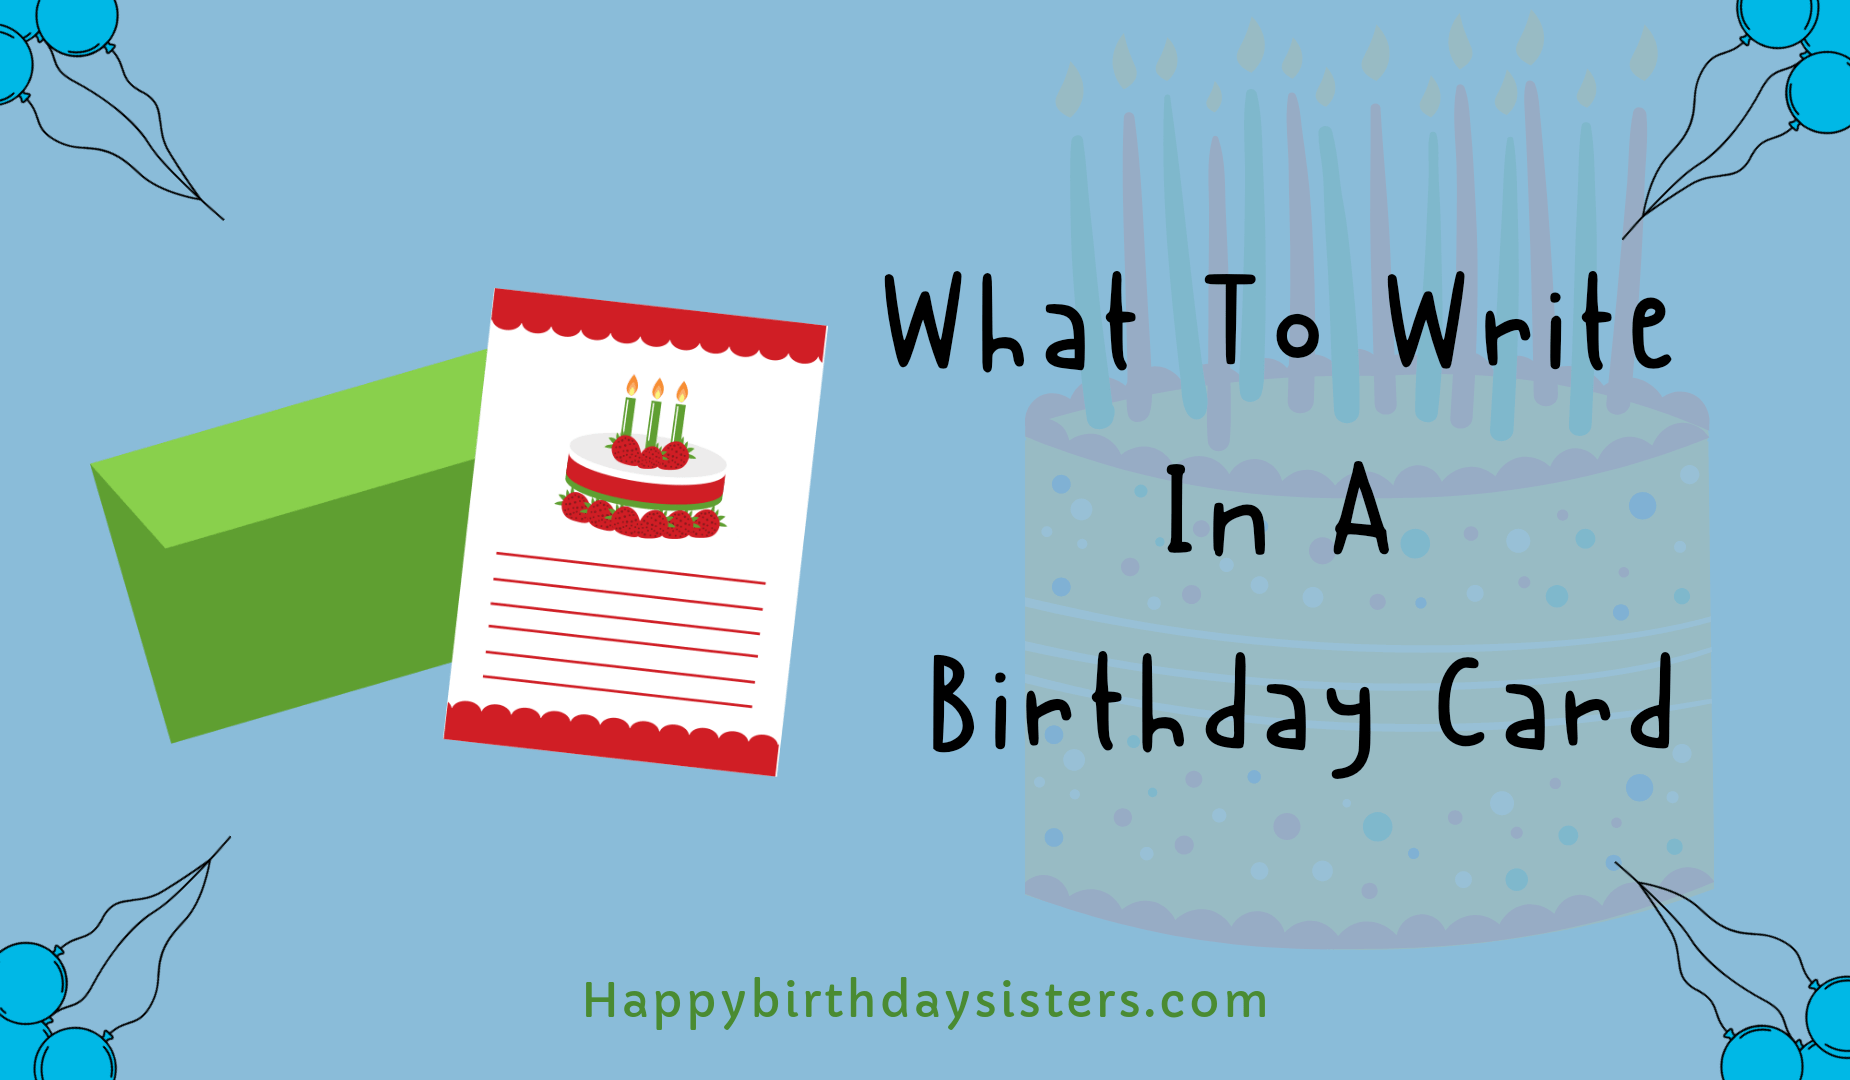 what-to-write-in-a-birthday-card-for-a-buddy-english-quotes